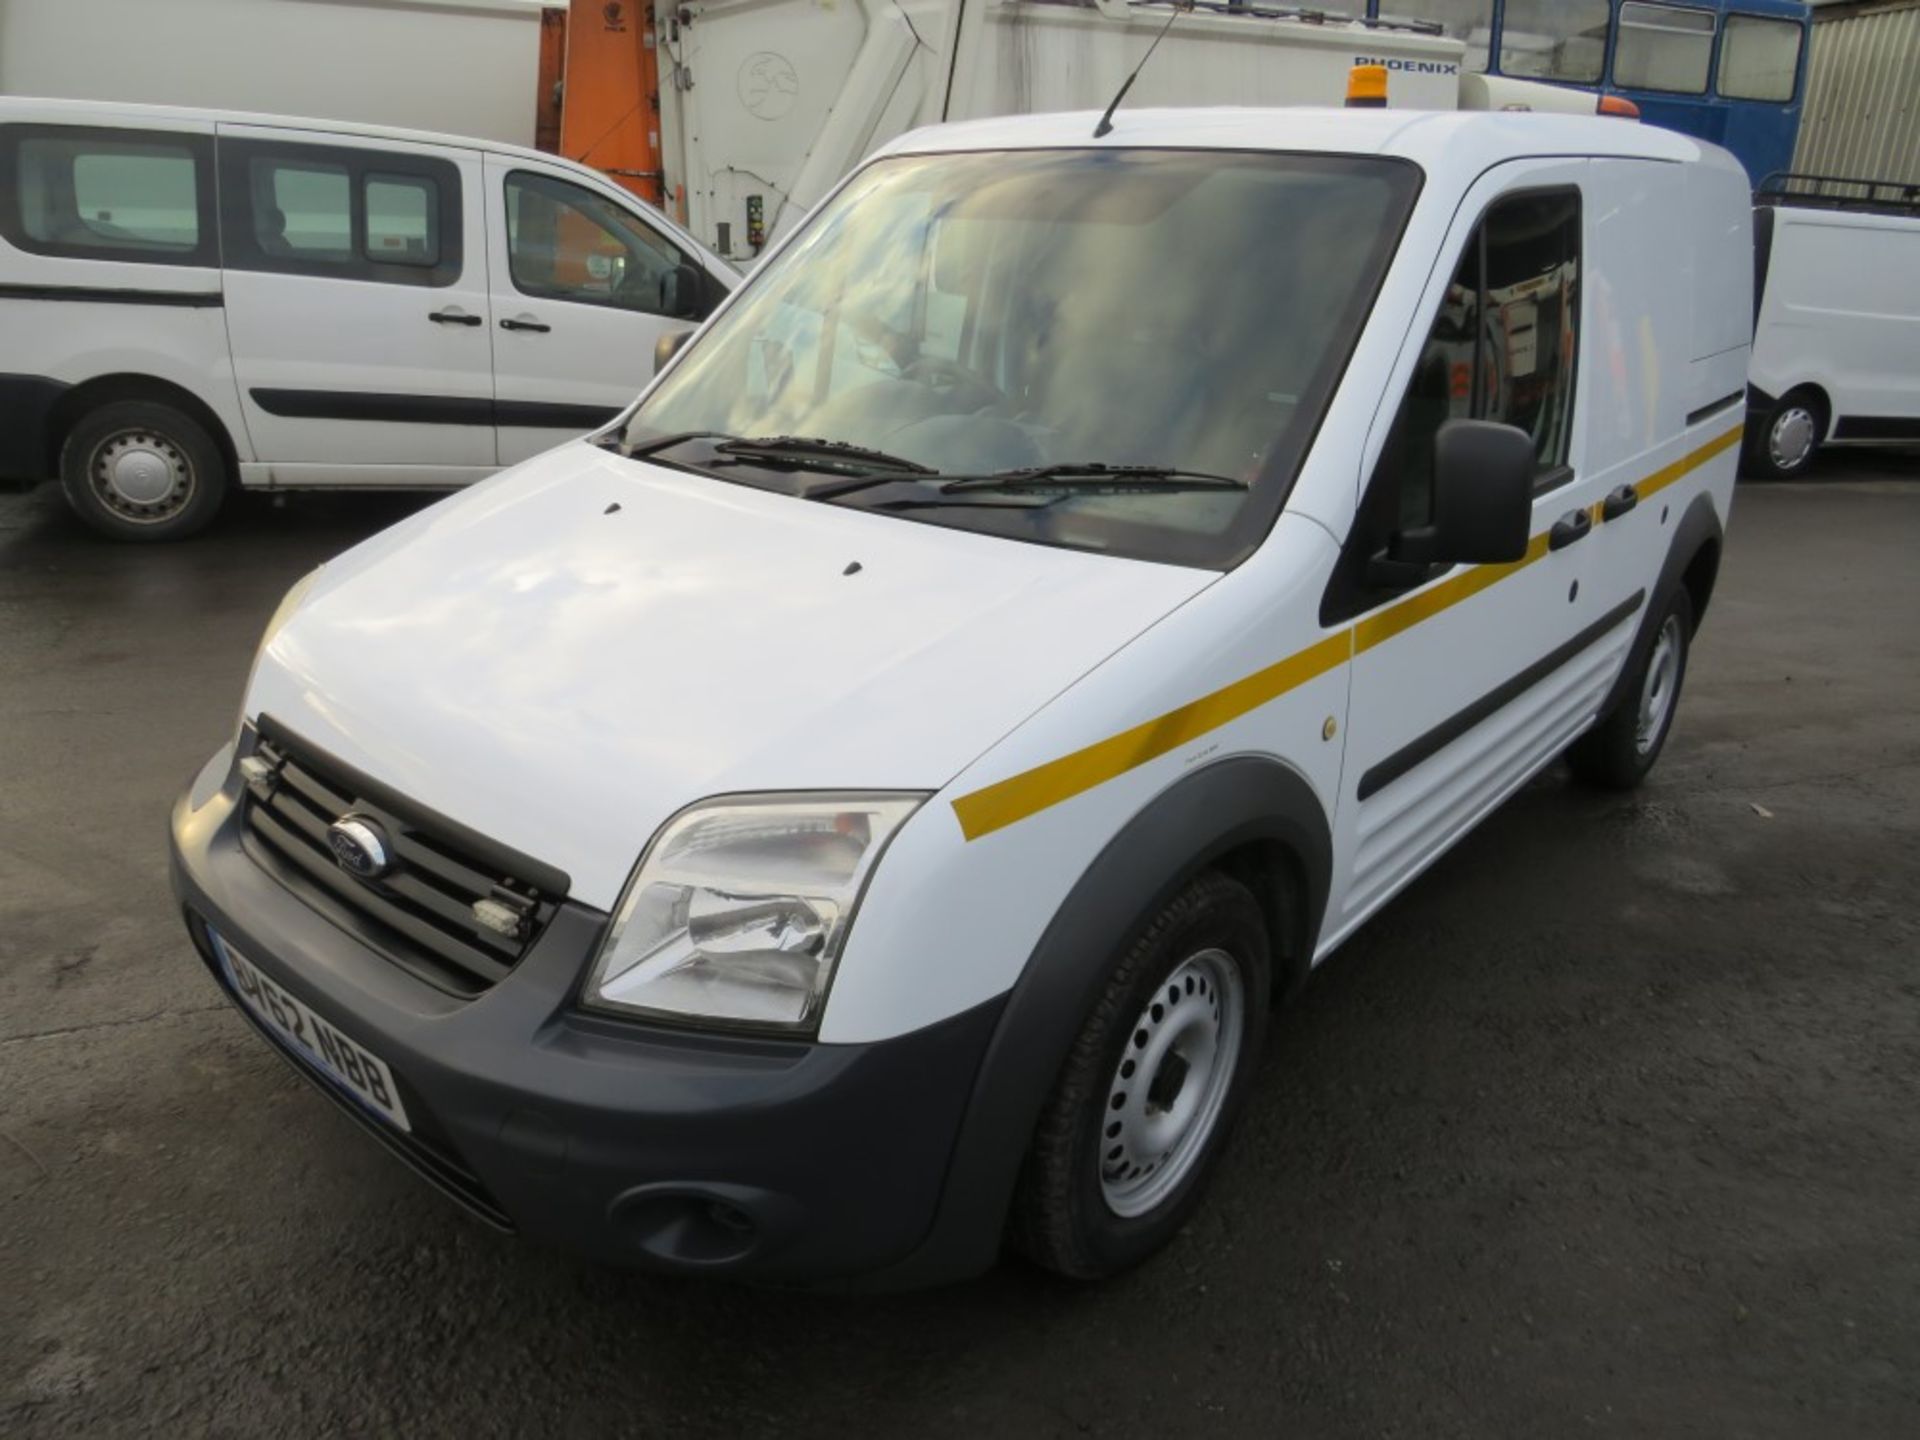 62 reg FORD TRANSIT CONNECT 110 T200 SWB, 1ST REG 10/12, 75593M WARRANTED, V5 HERE, 1 OWNER FROM NEW - Image 2 of 6